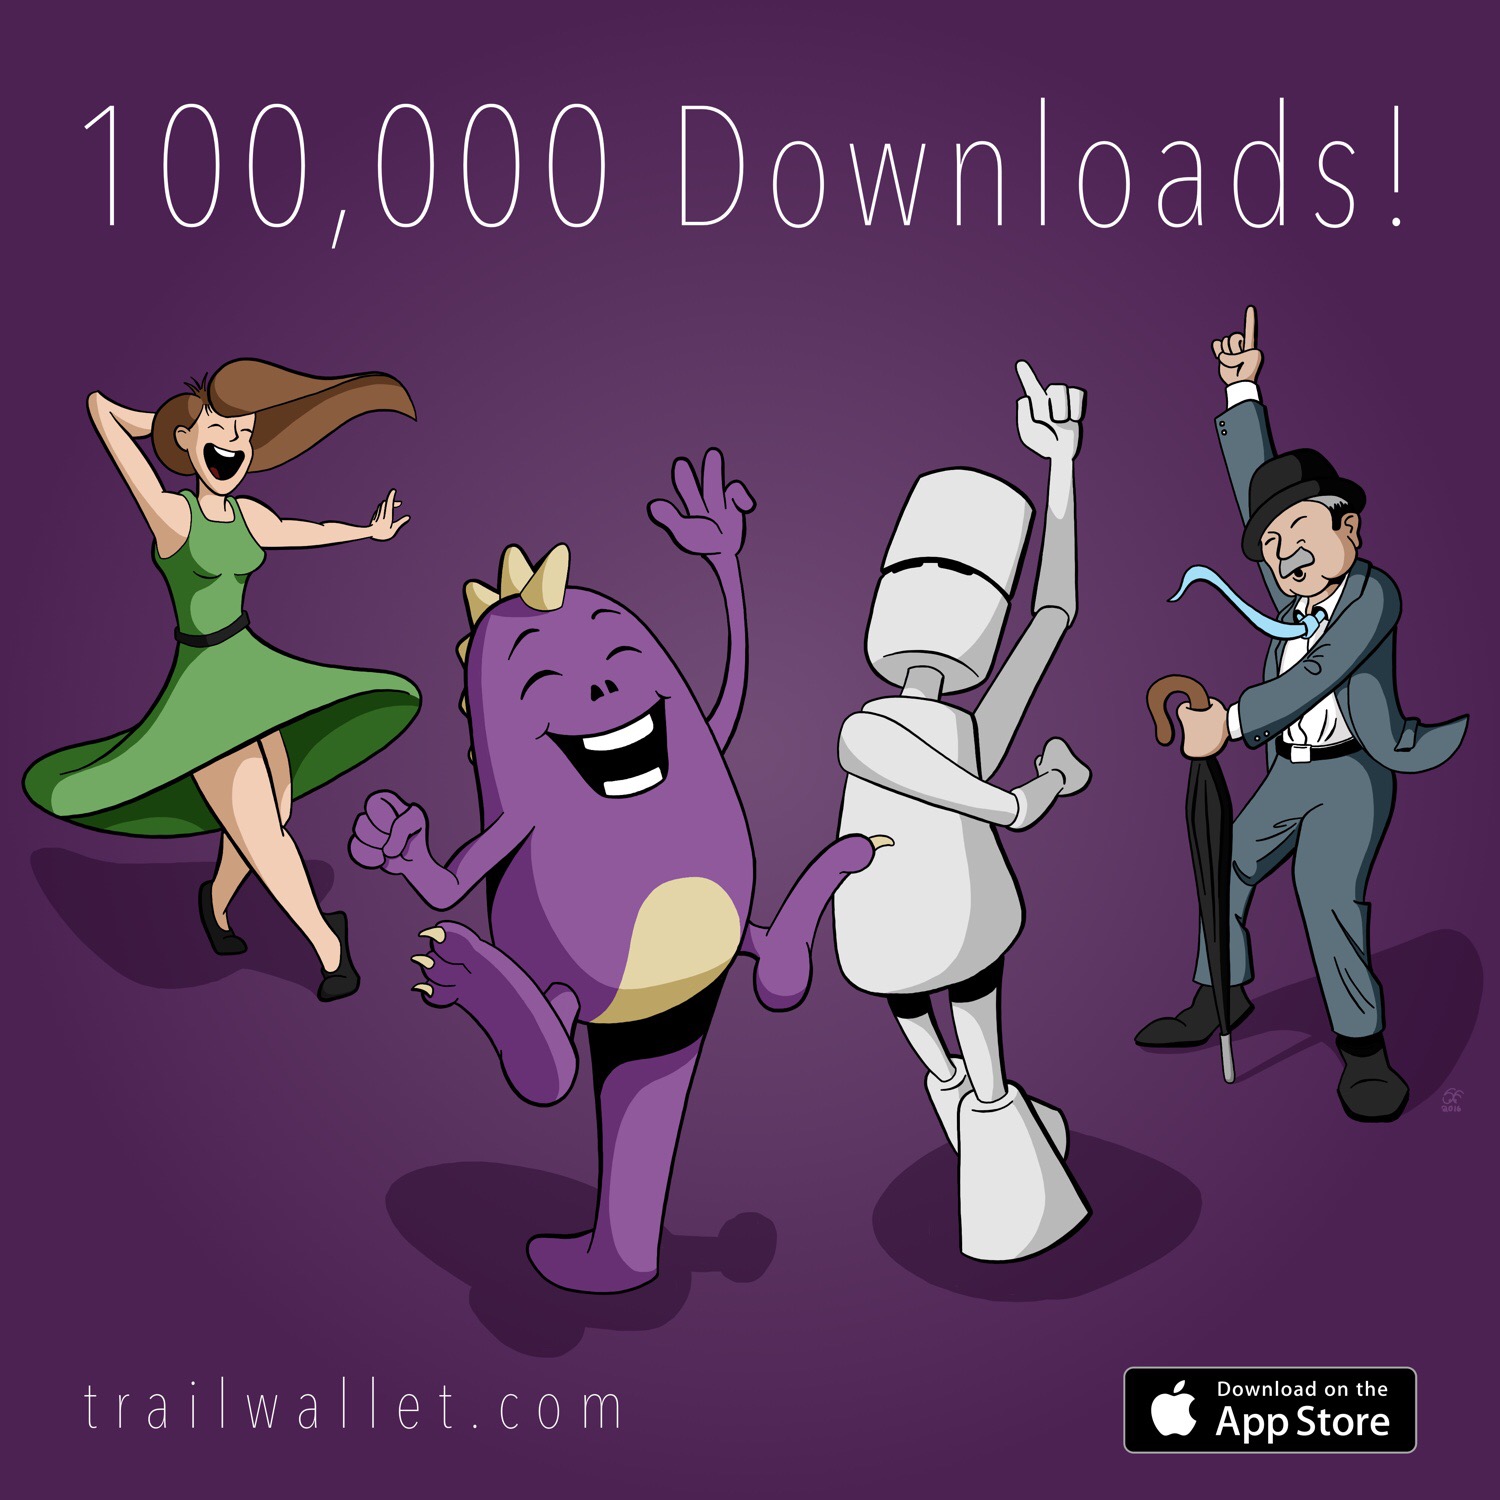 An illustration of the Trail Wallet team celebrating the 100,000th download.